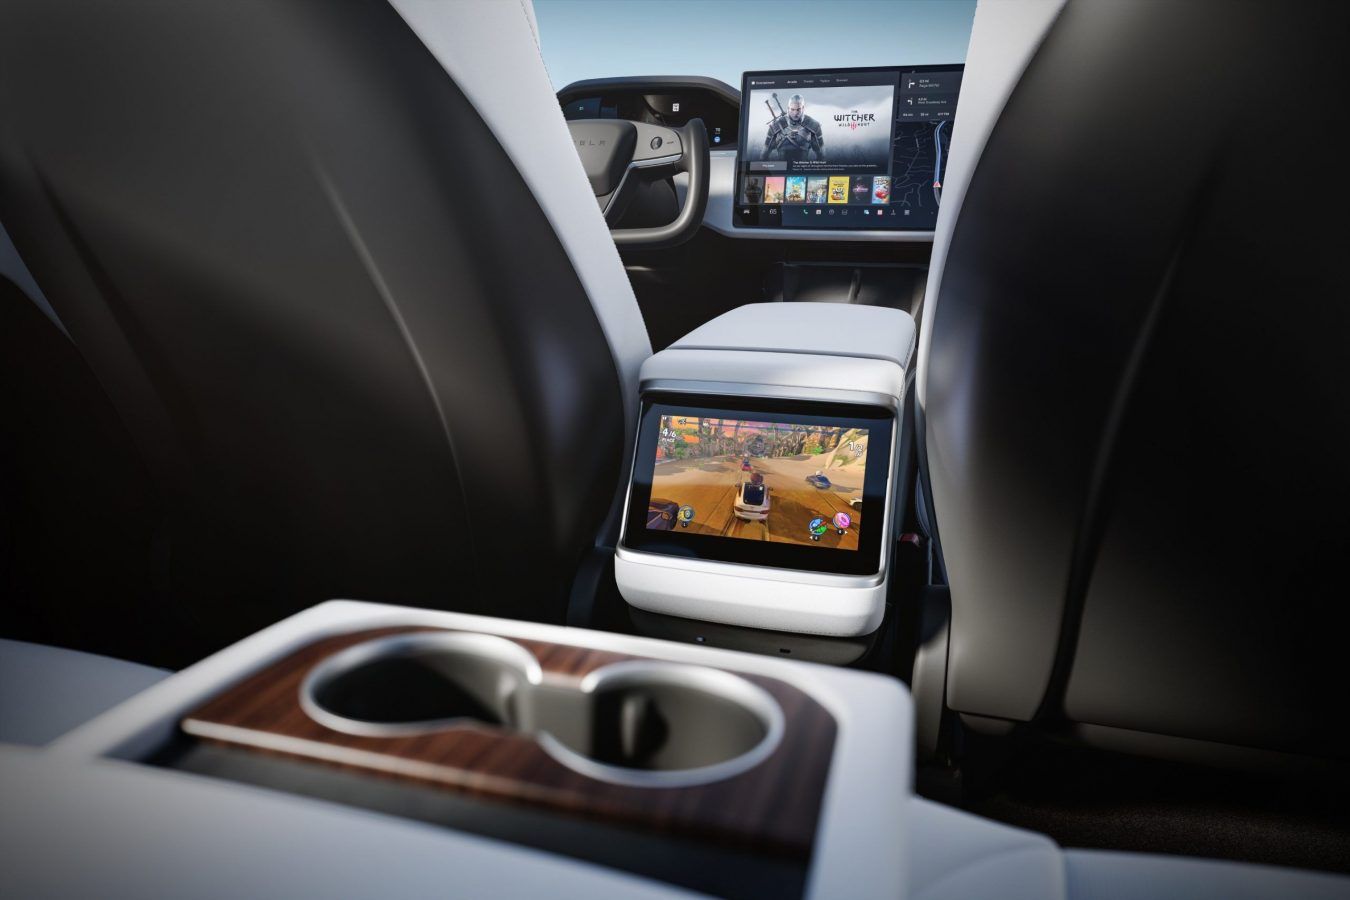 Tesla is looking into integrating video games in its cars